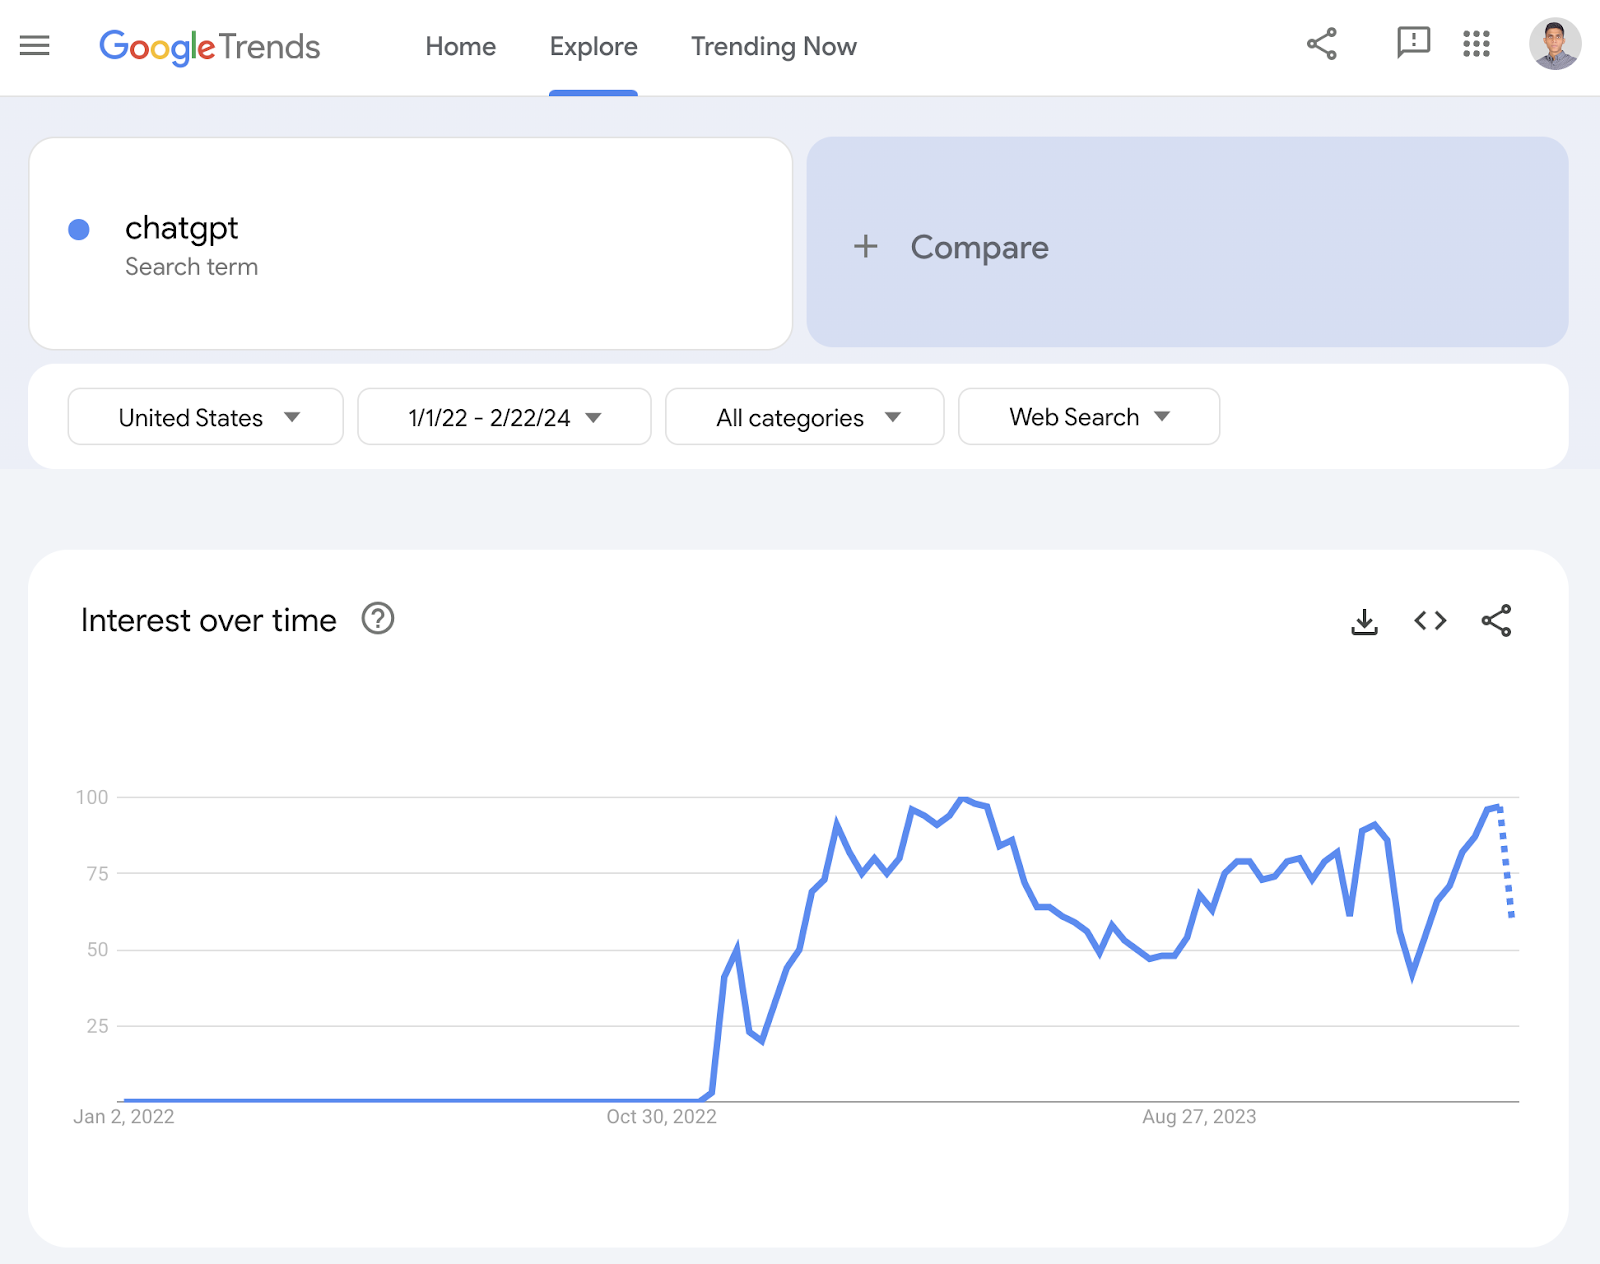 Google Trends "interest implicit    time" graph for "chatgpt" query